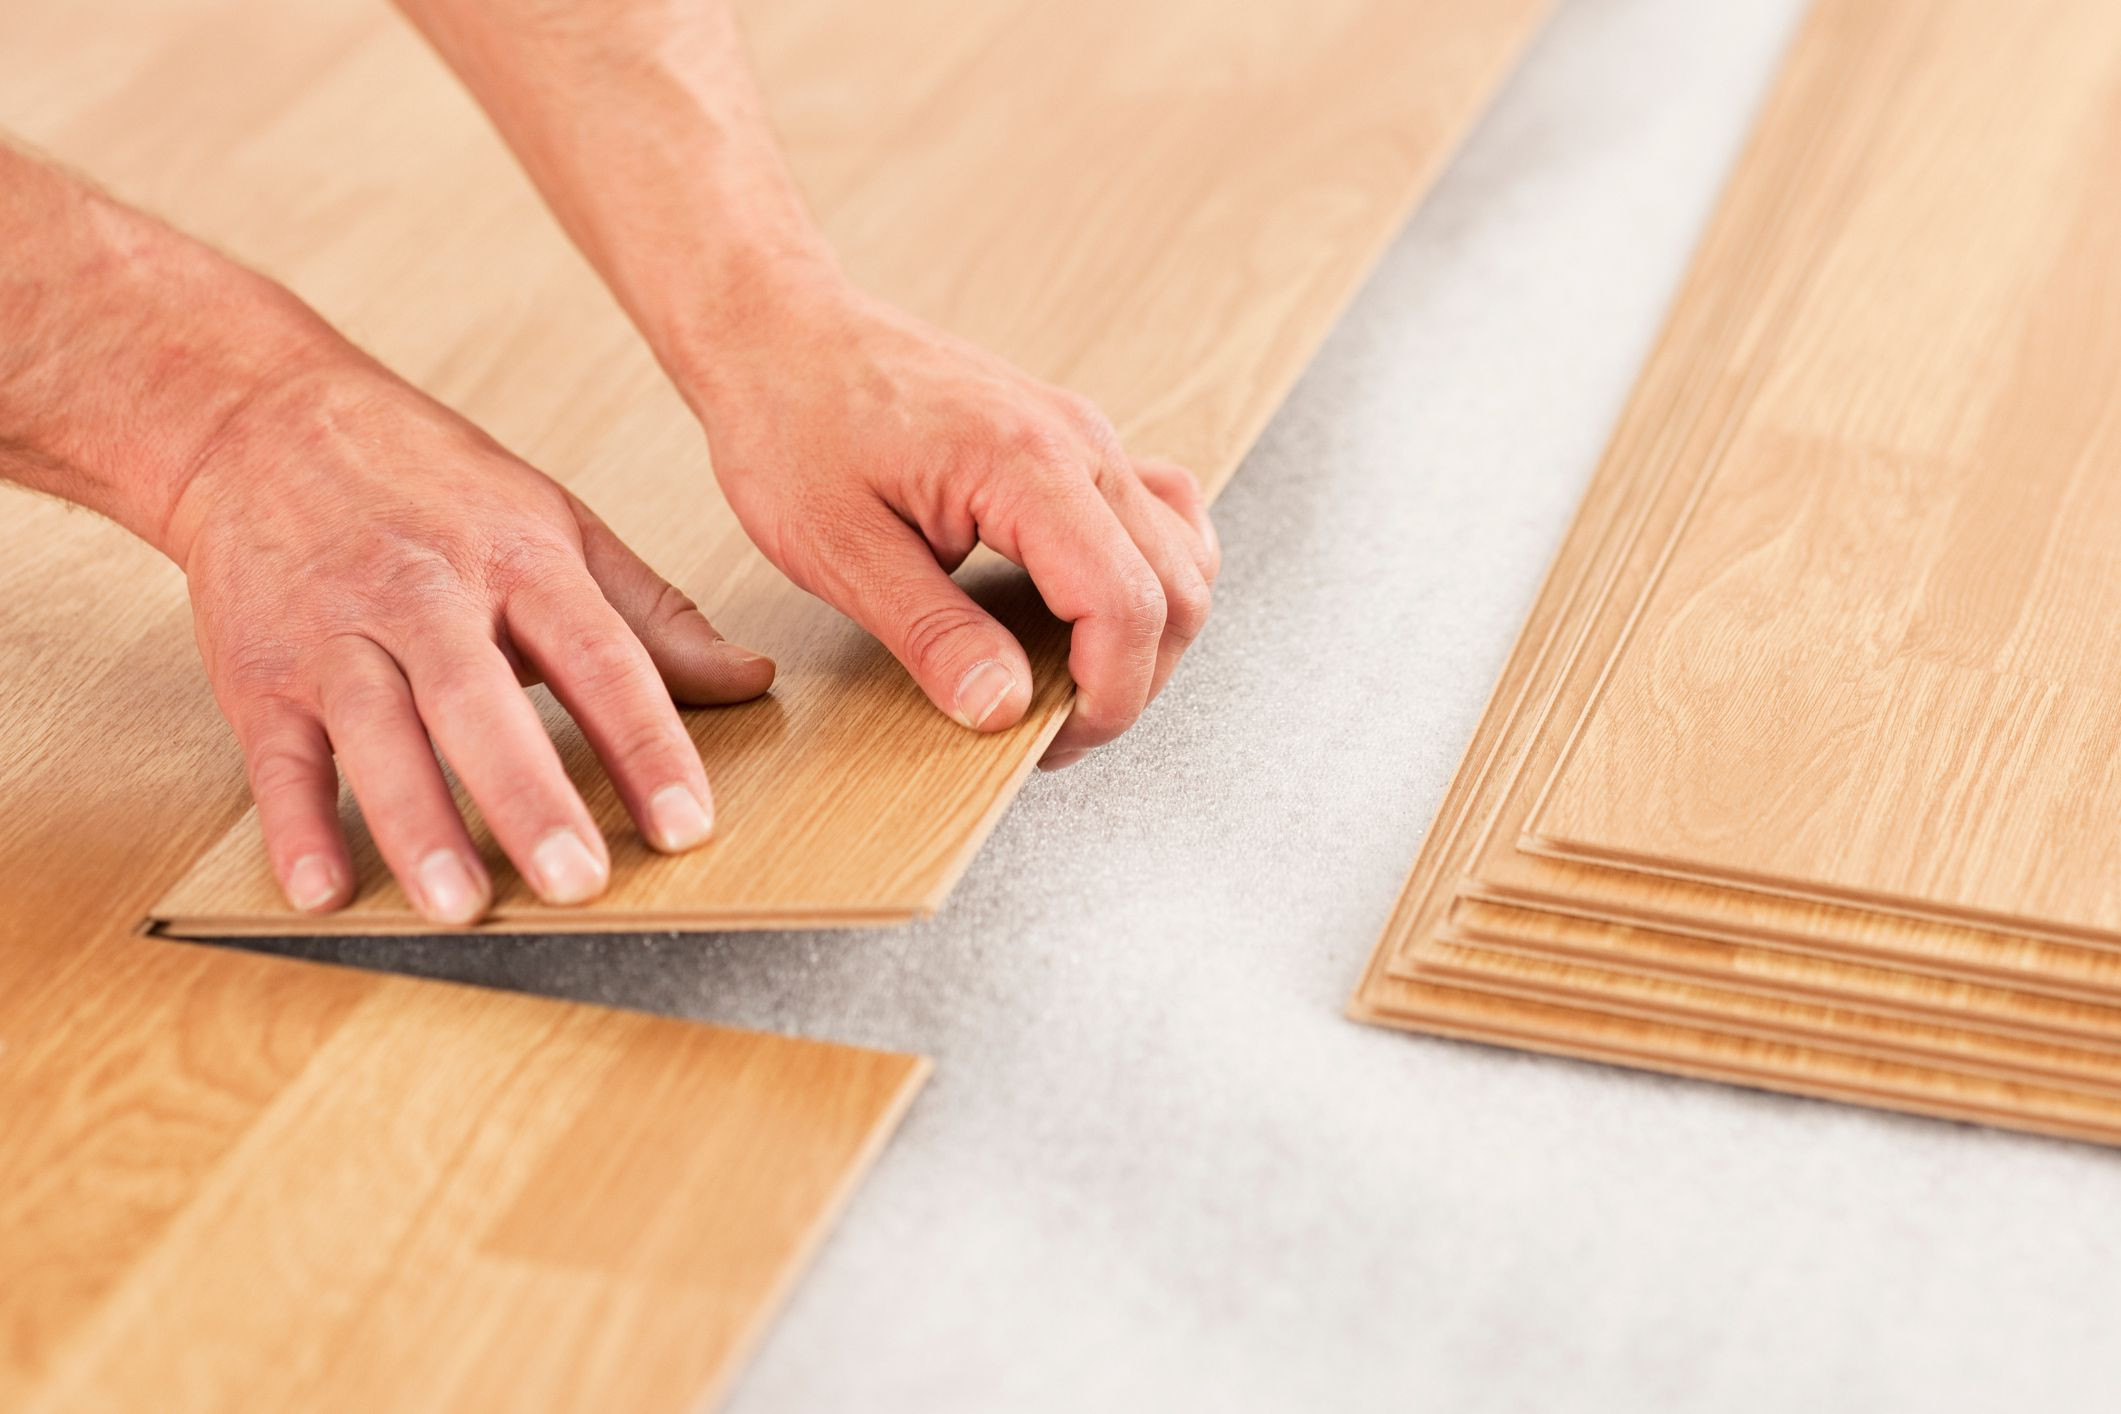 16 Spectacular Floating Vs Gluing Hardwood Floors 2024 free download floating vs gluing hardwood floors of laminate underlayment pros and cons intended for laminate floor install gettyimages 154961561 588816495f9b58bdb3da1a02